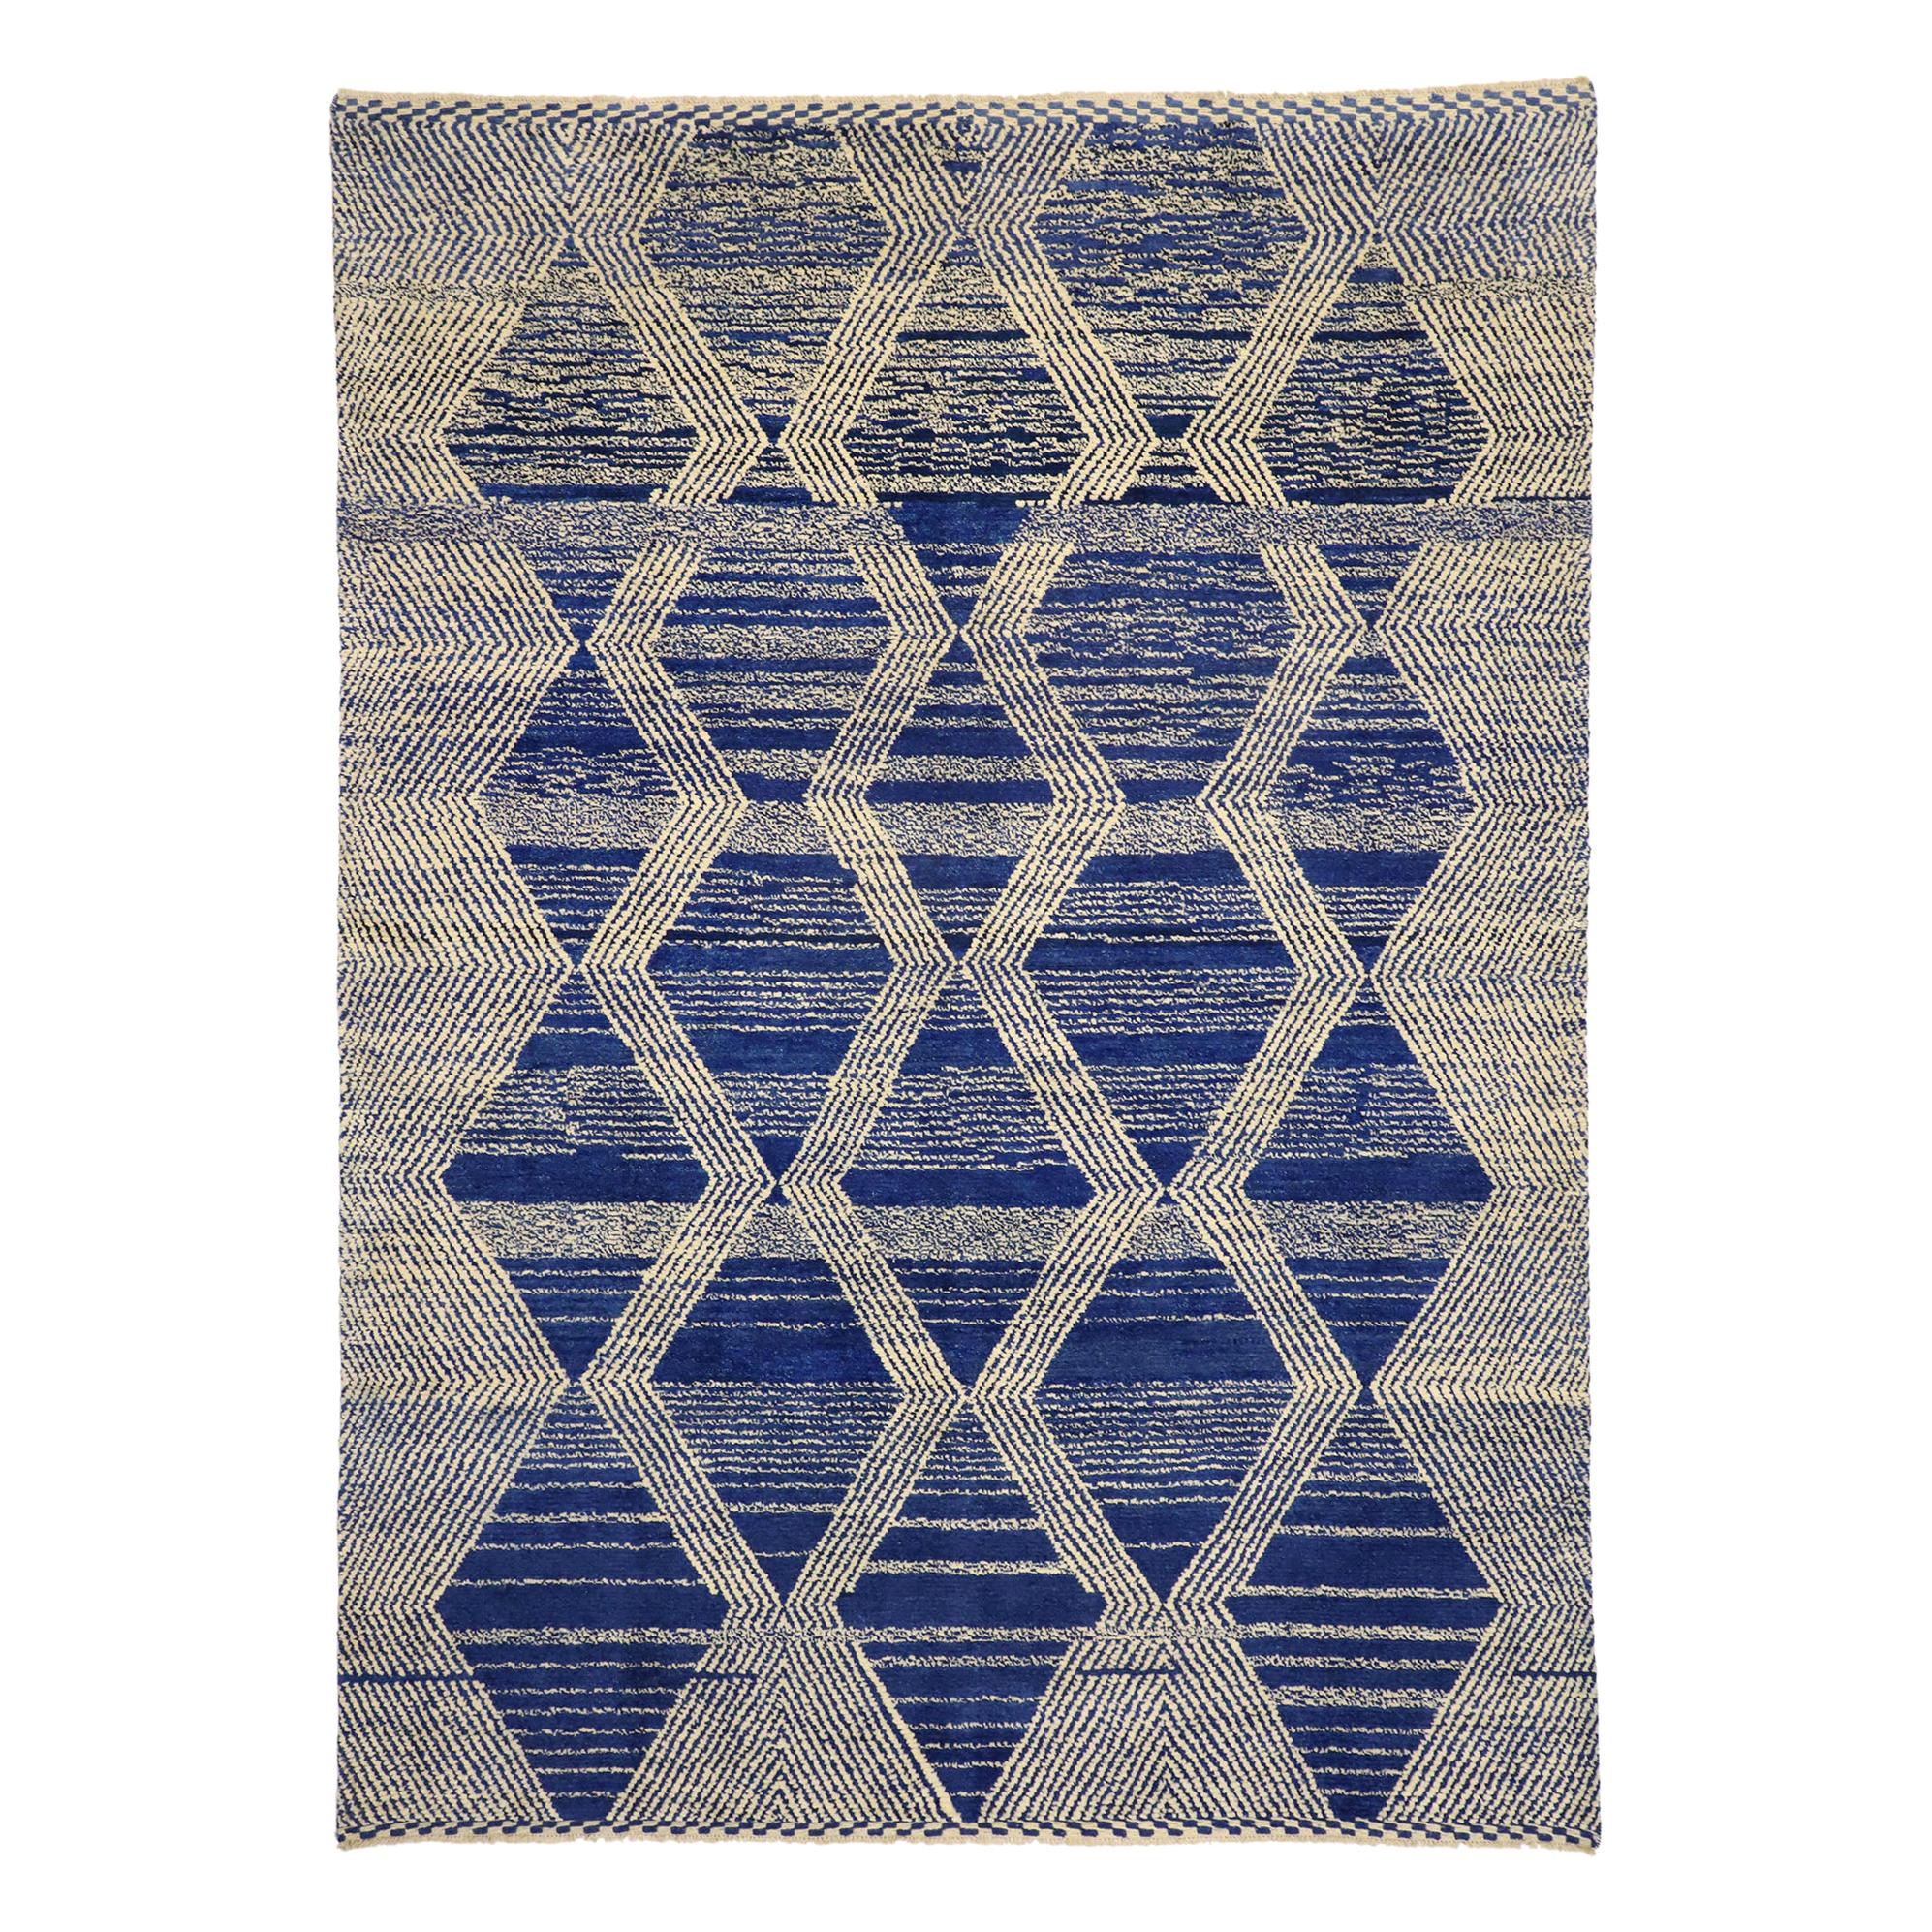 New Contemporary Geometric Moroccan Rug with Deconstructivism Postmodern Style